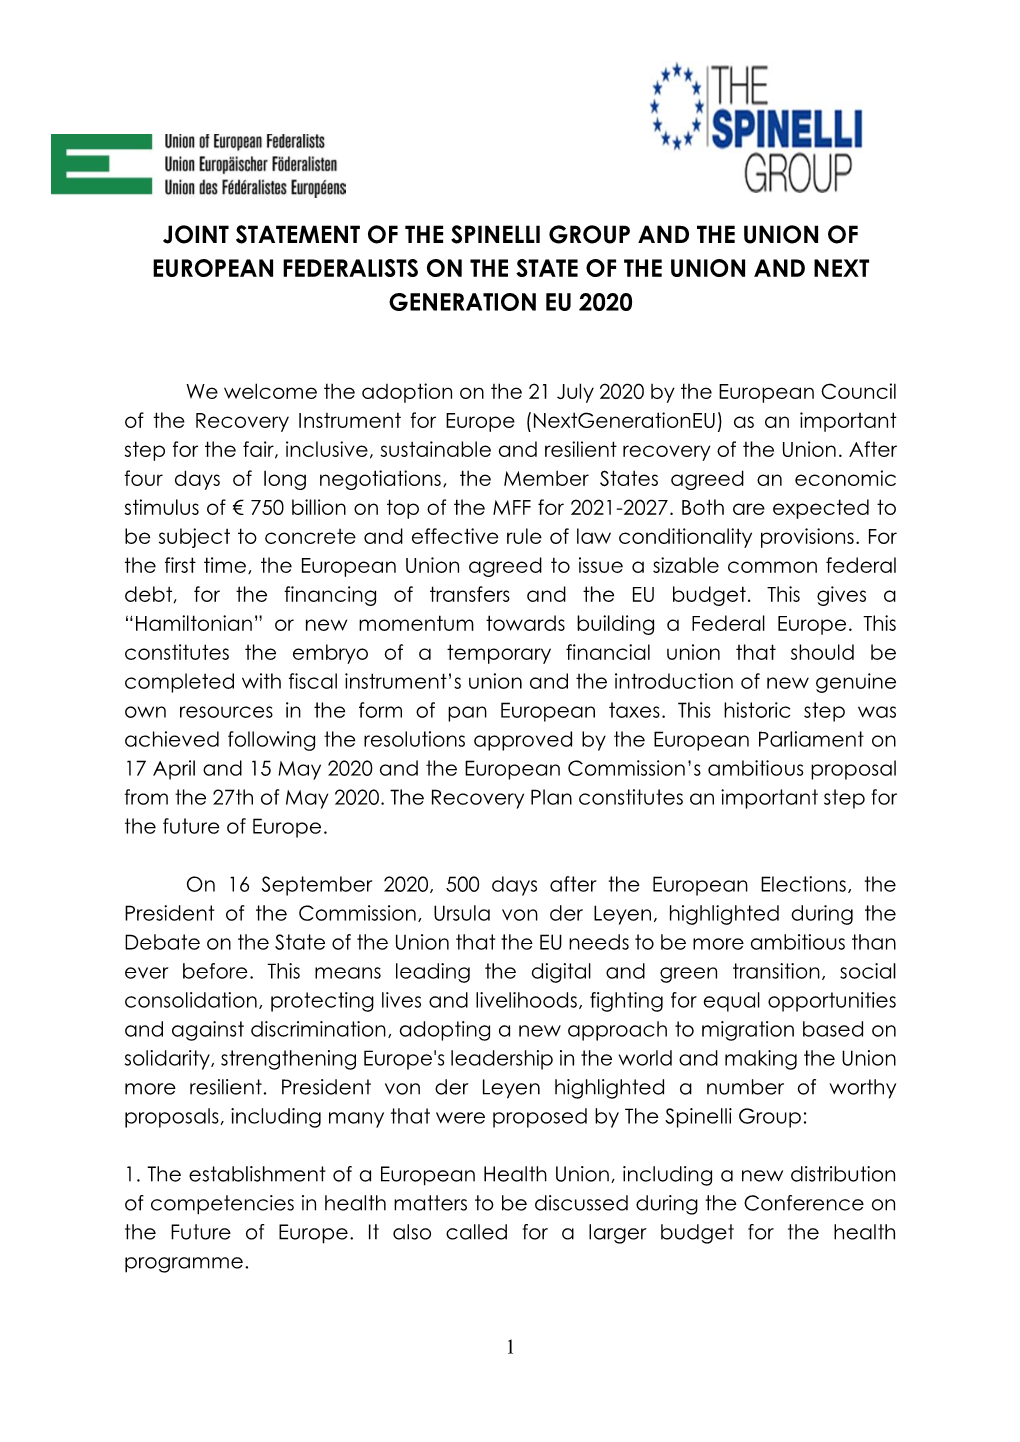 Joint Statement of the Spinelli Group and the Union of European Federalists on the State of the Union and Next Generation Eu 2020